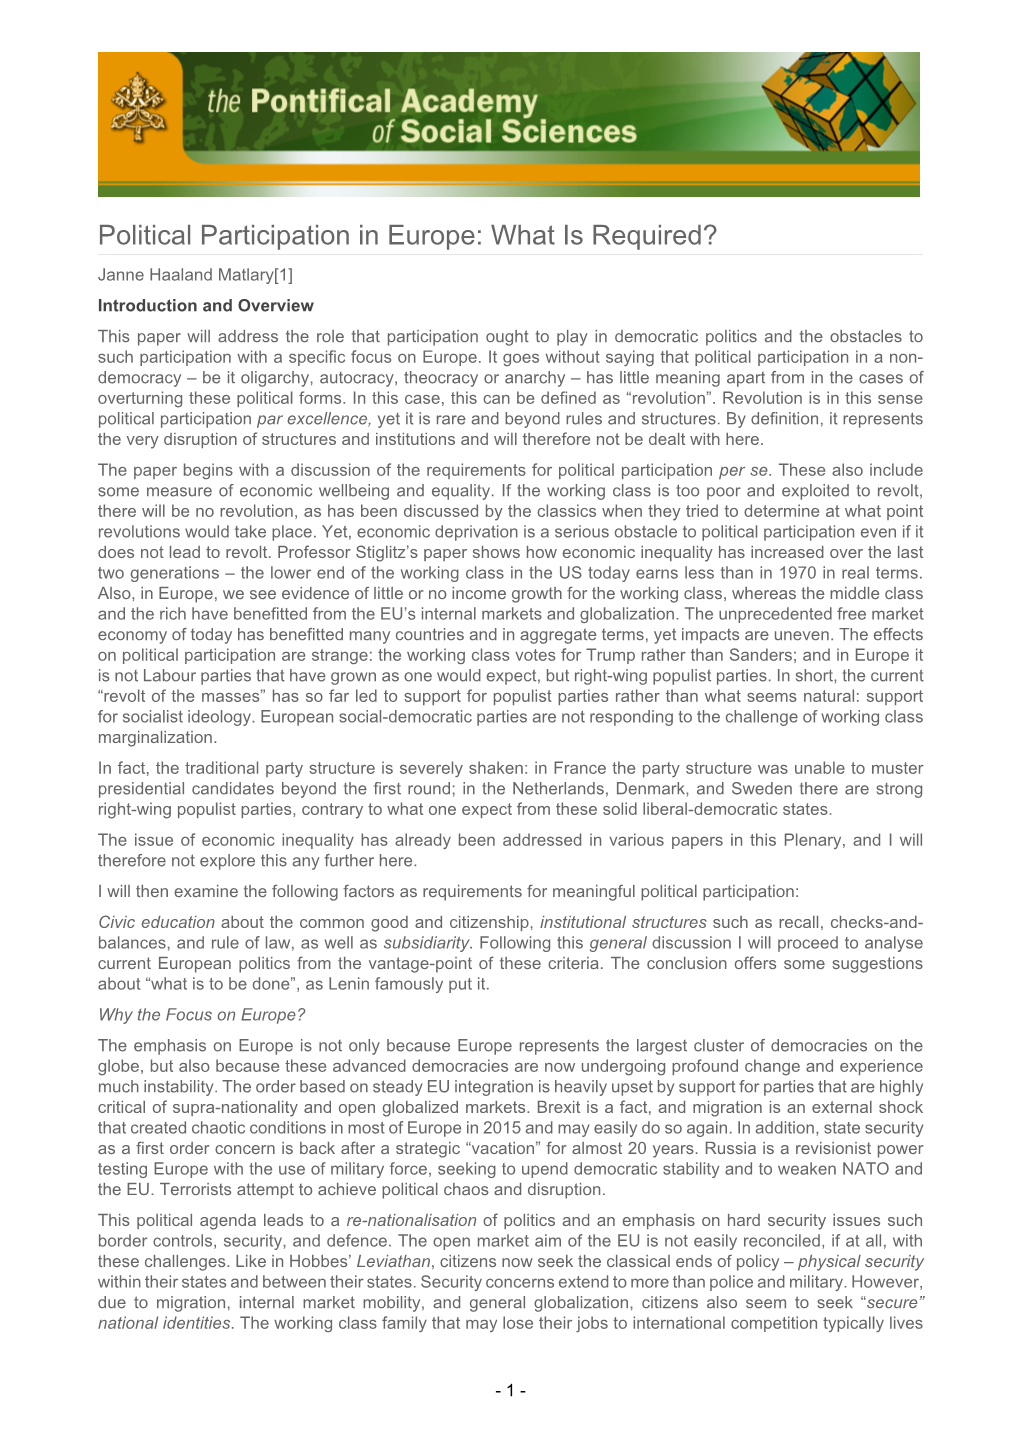 Political Participation in Europe: What Is Required?